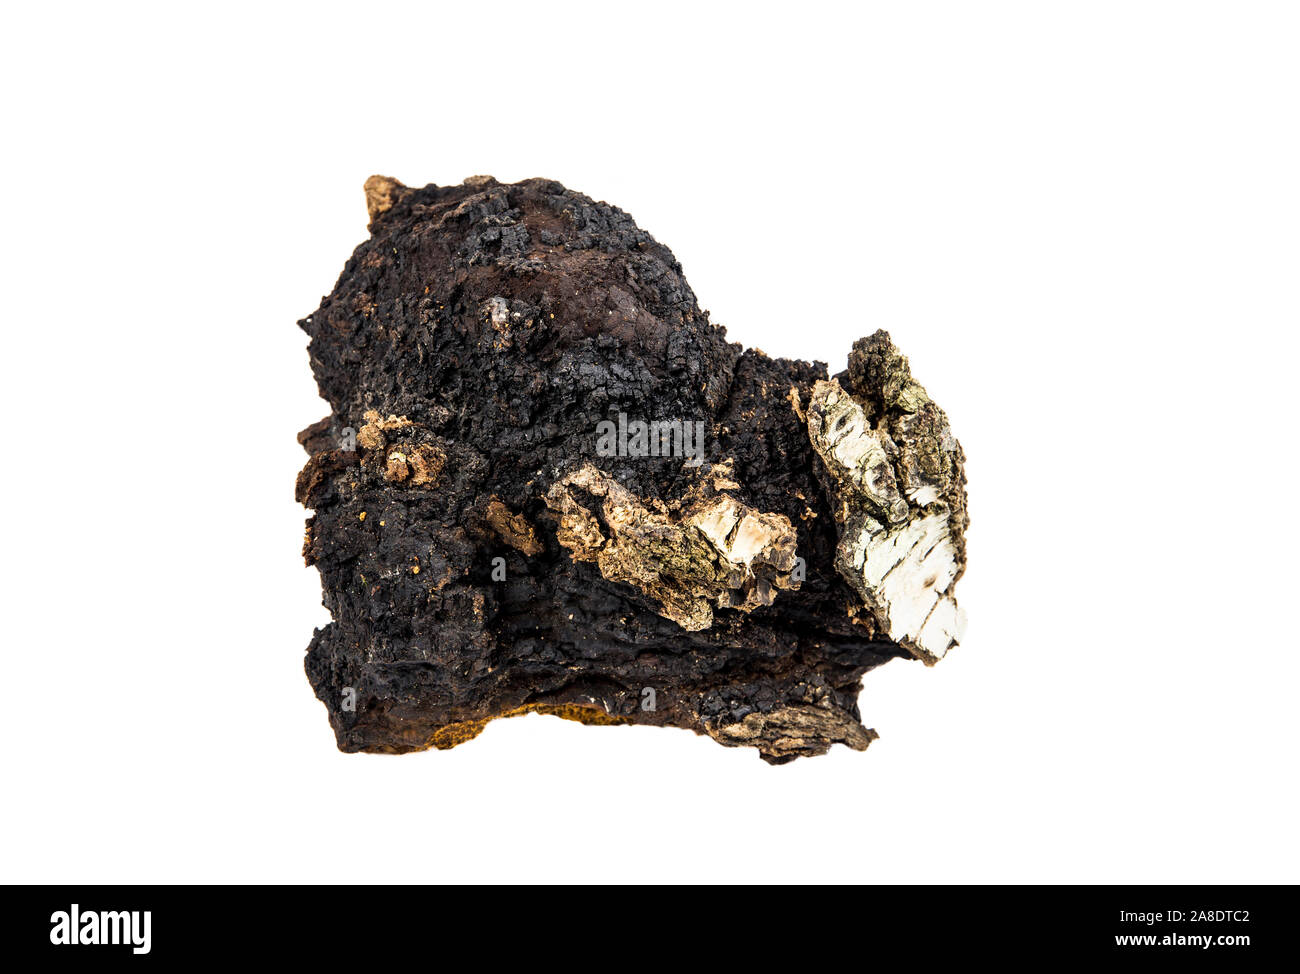 Over 20 years old big wild natural organic chunk of chaga mushroom, Inonotus obliquus isolated on white background. Gathered from birch tree trunk in Stock Photo